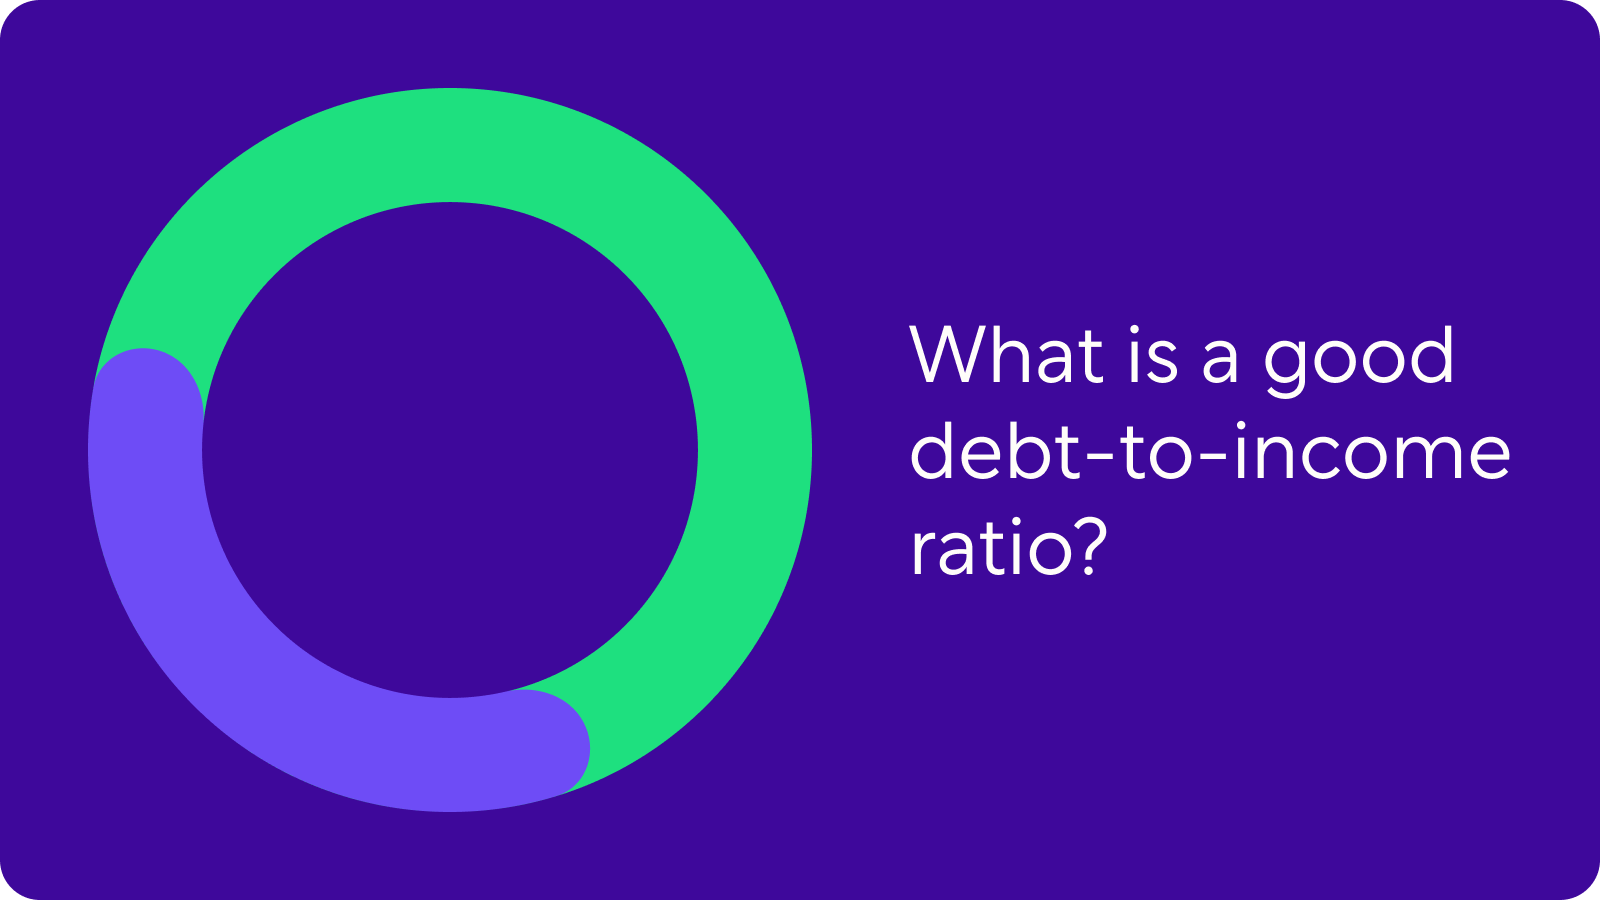 Learn about a good debt-to-income ratio for a mortgage